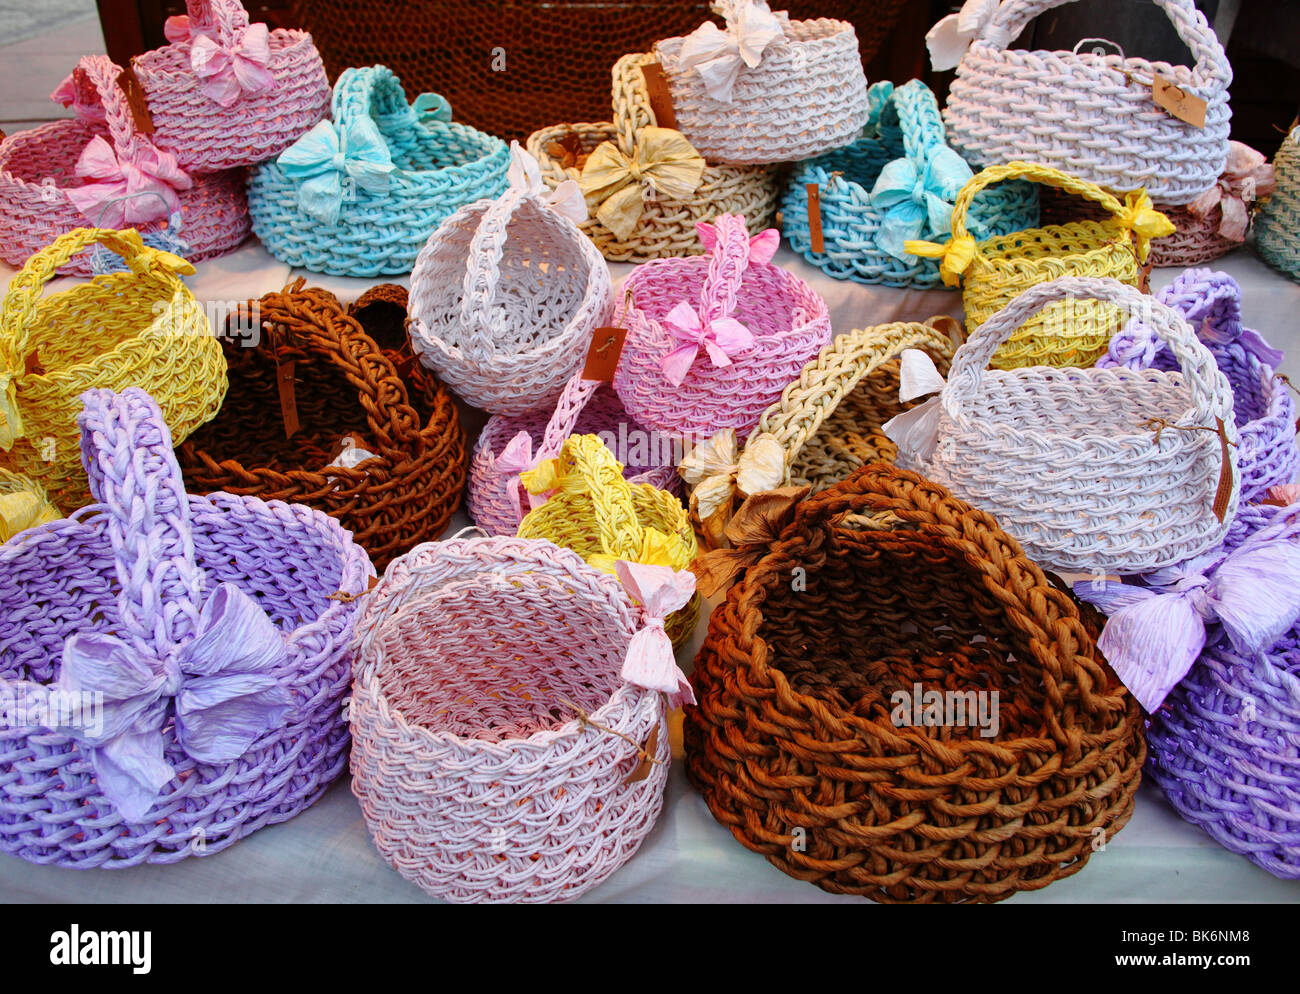 Hand made colorful baskets Stock Photo